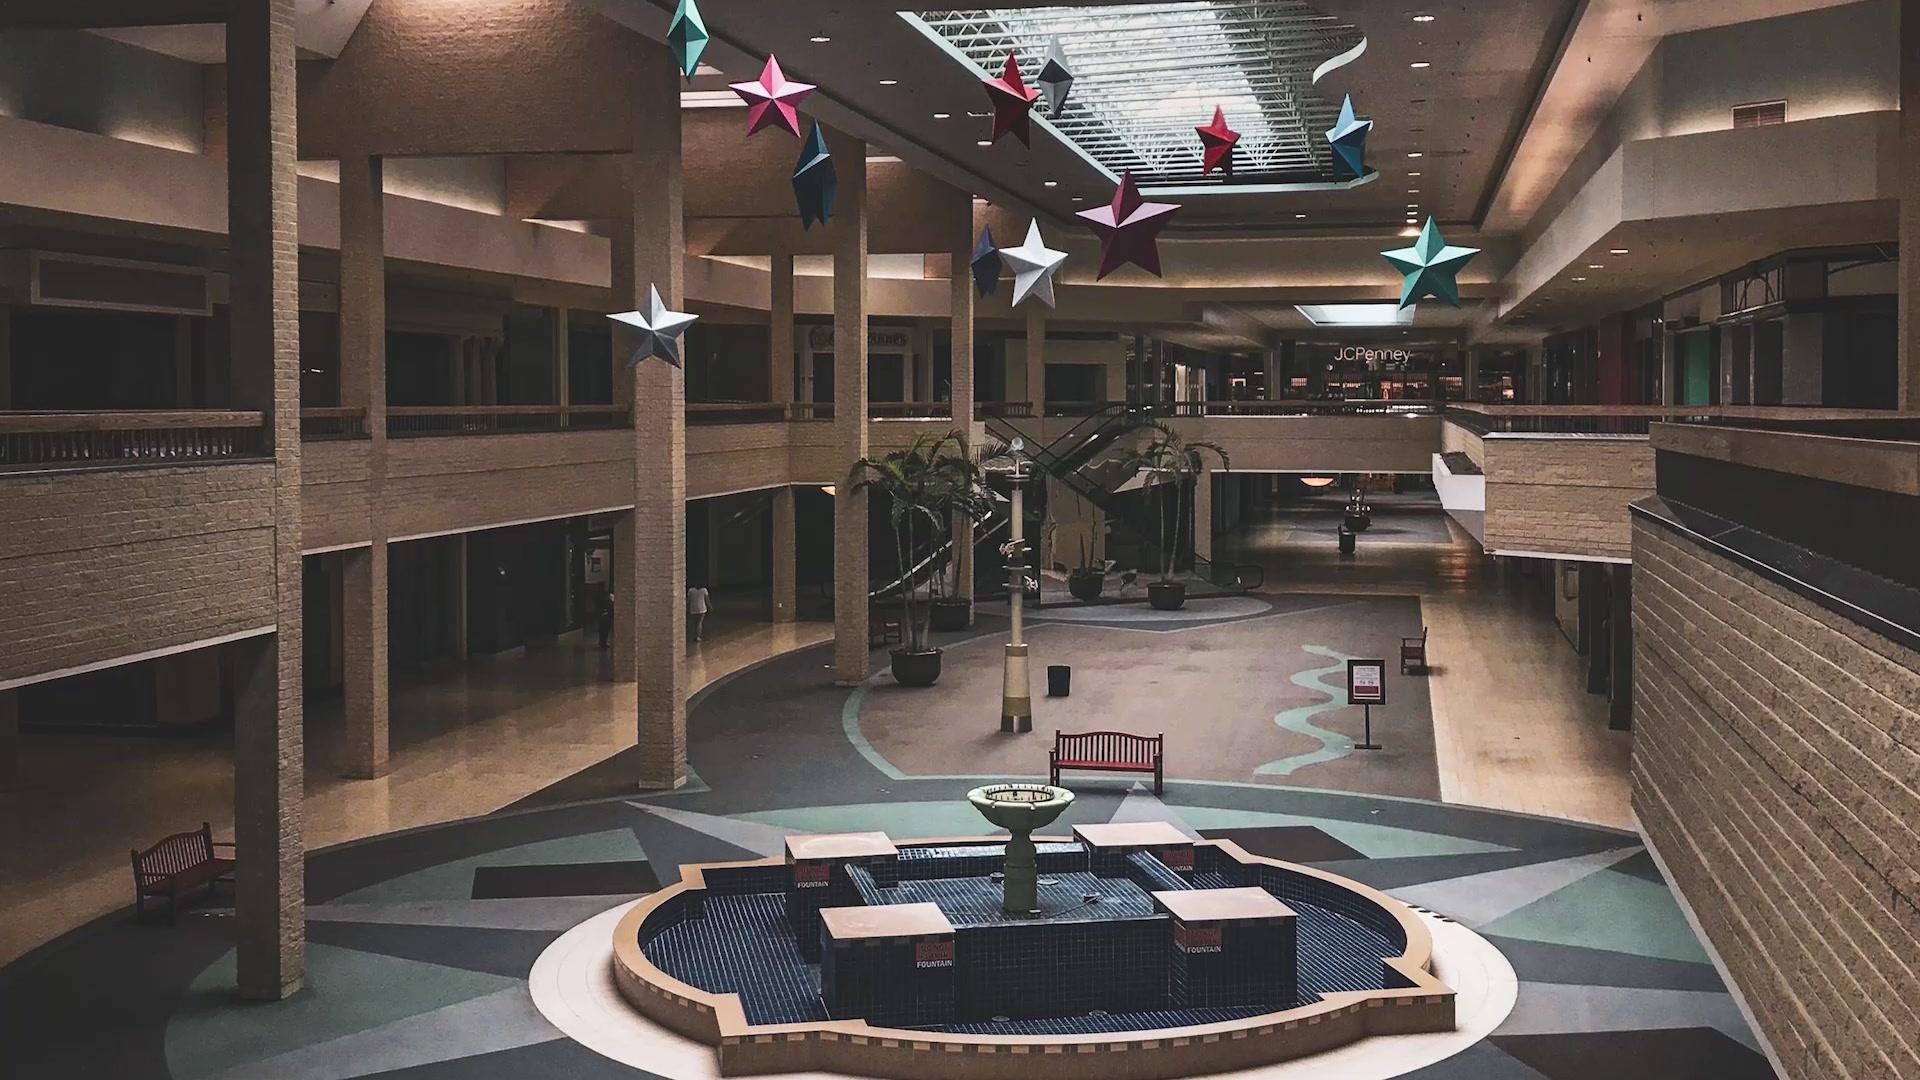 Teens And Mall Culture: The Fading Love Affair?